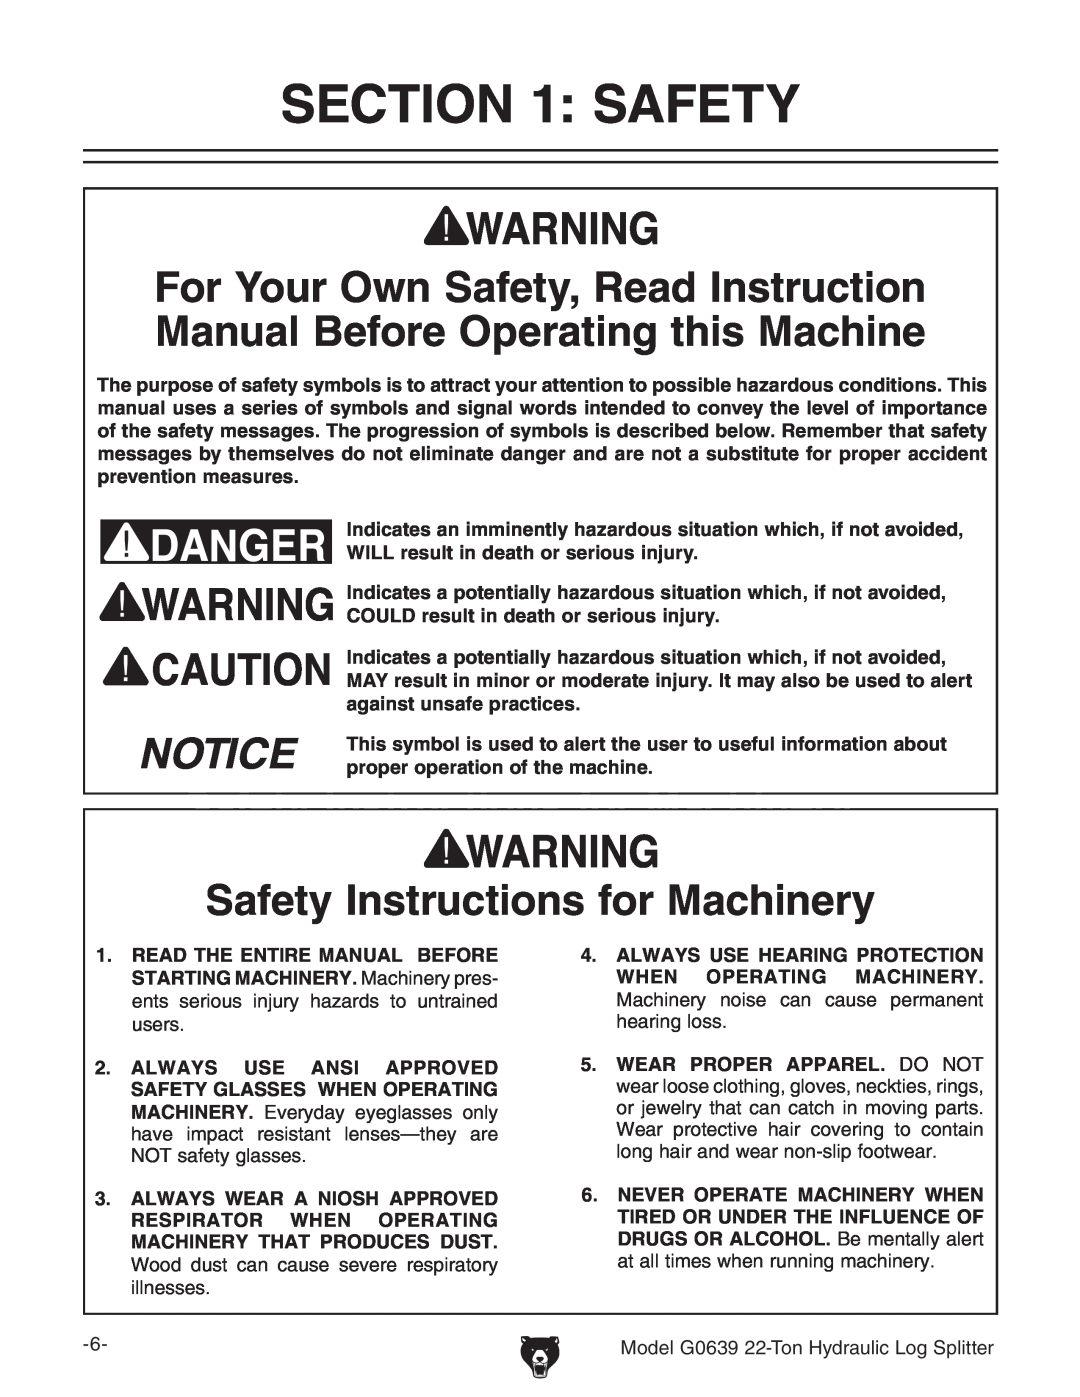 Grizzly owner manual Safety Instructions for Machinery, Model G0639 22-Ton Hydraulic Log Splitter 